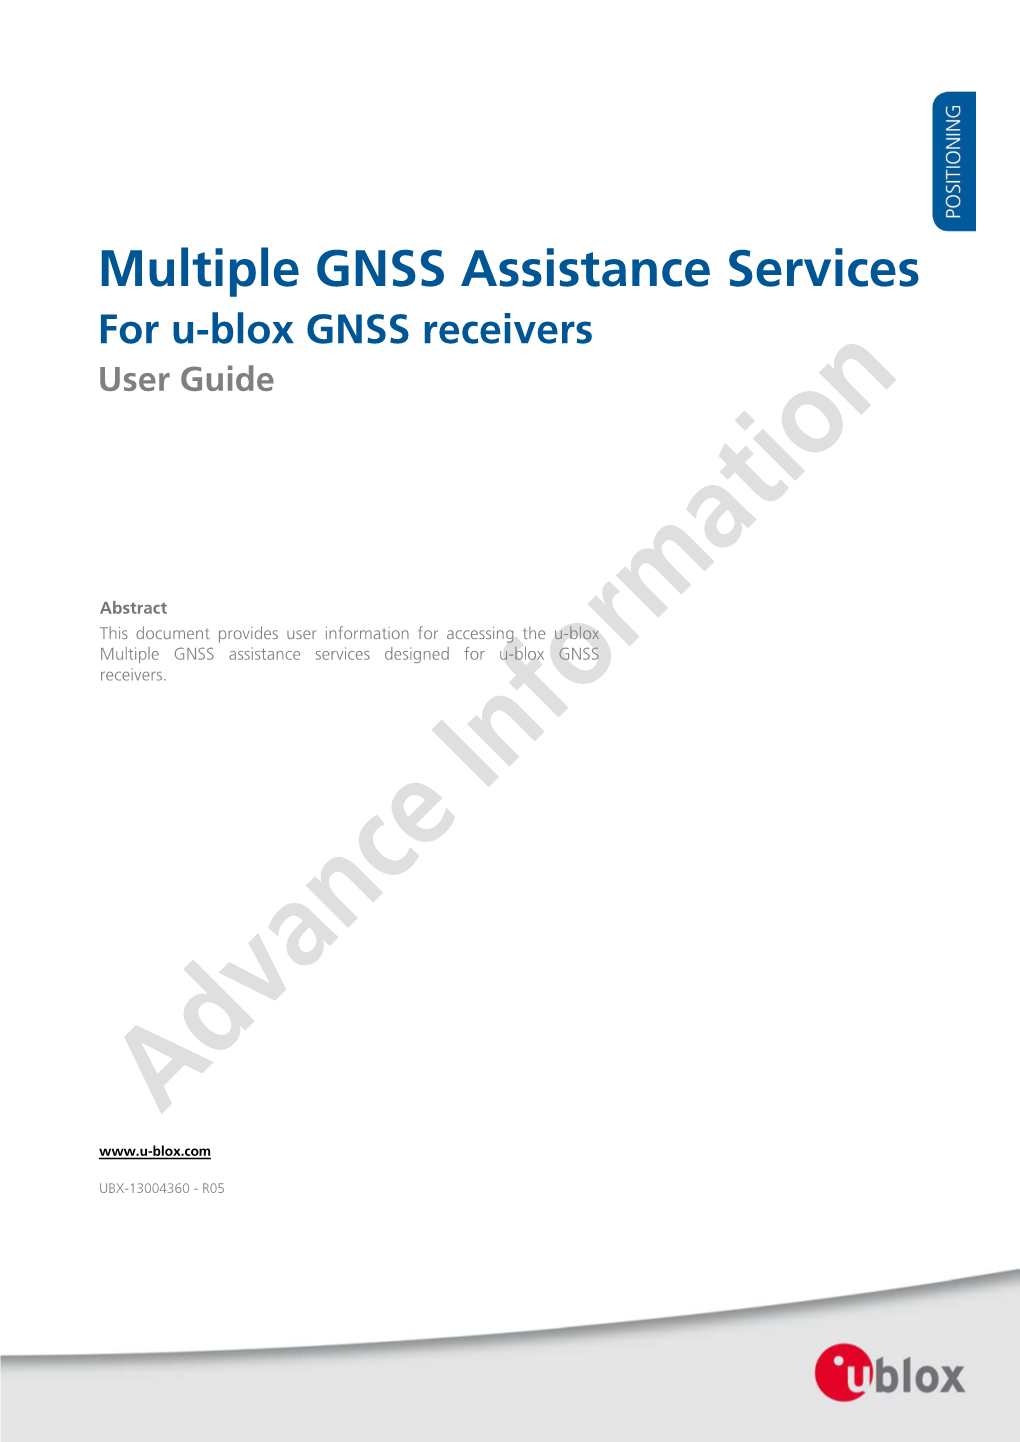 Multiple GNSS Assistance Services for U-Blox GNSS Receivers User Guide